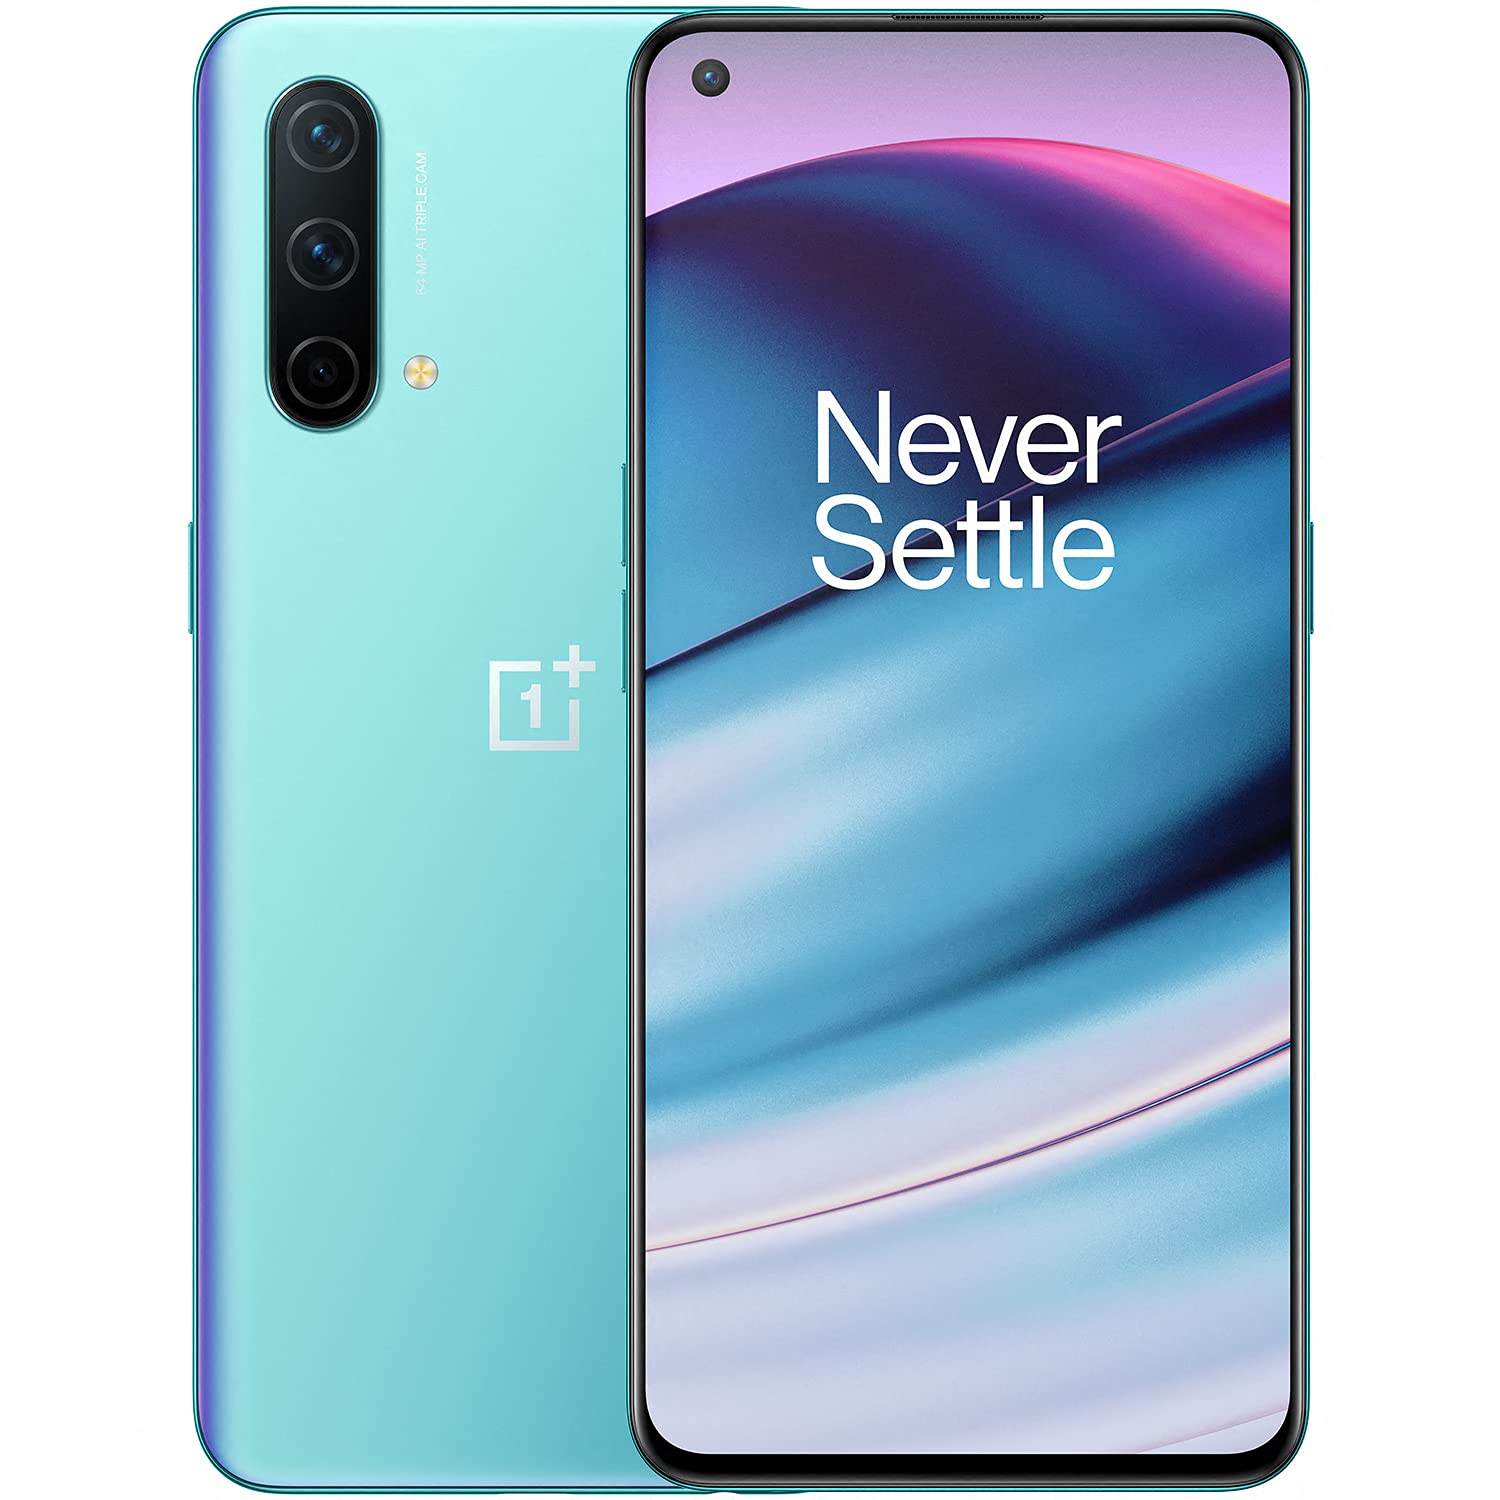 PW Exclusive | Buy OnePlus Nord CE 5G ( 8GB RAM, 128GB Storage) + Apply Rs.2,000 Coupon